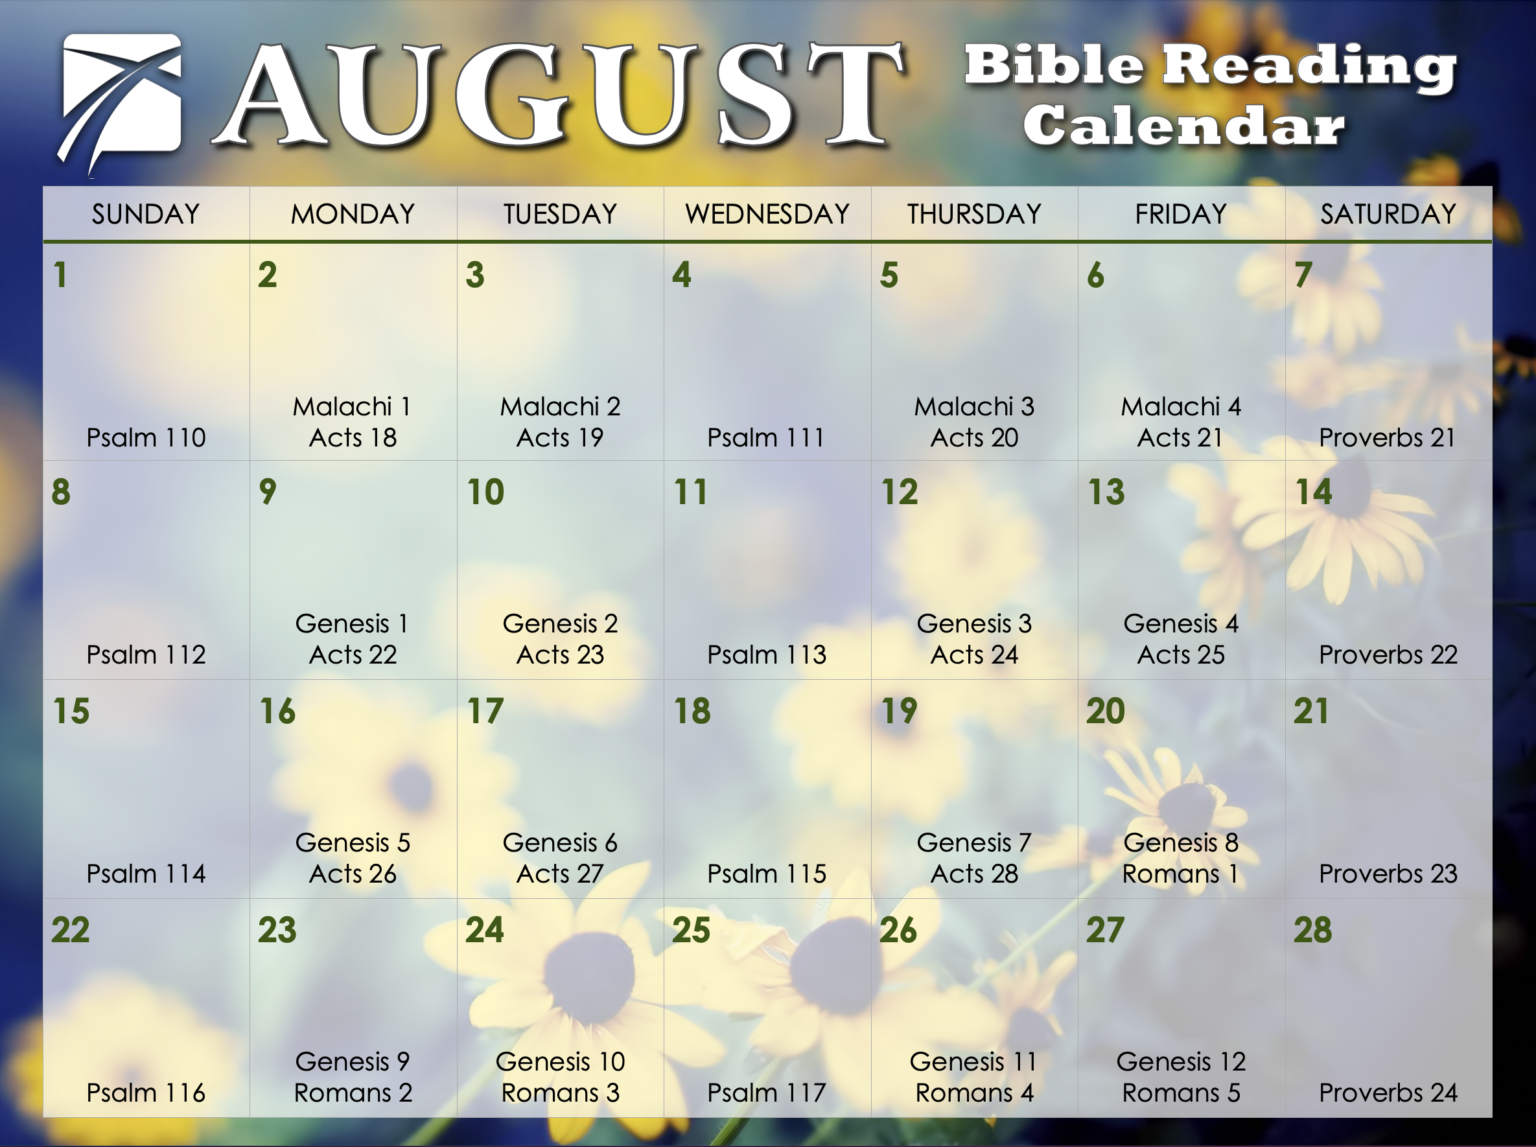 August is a Great Time to Start Regularly Reading Your Bible In God's